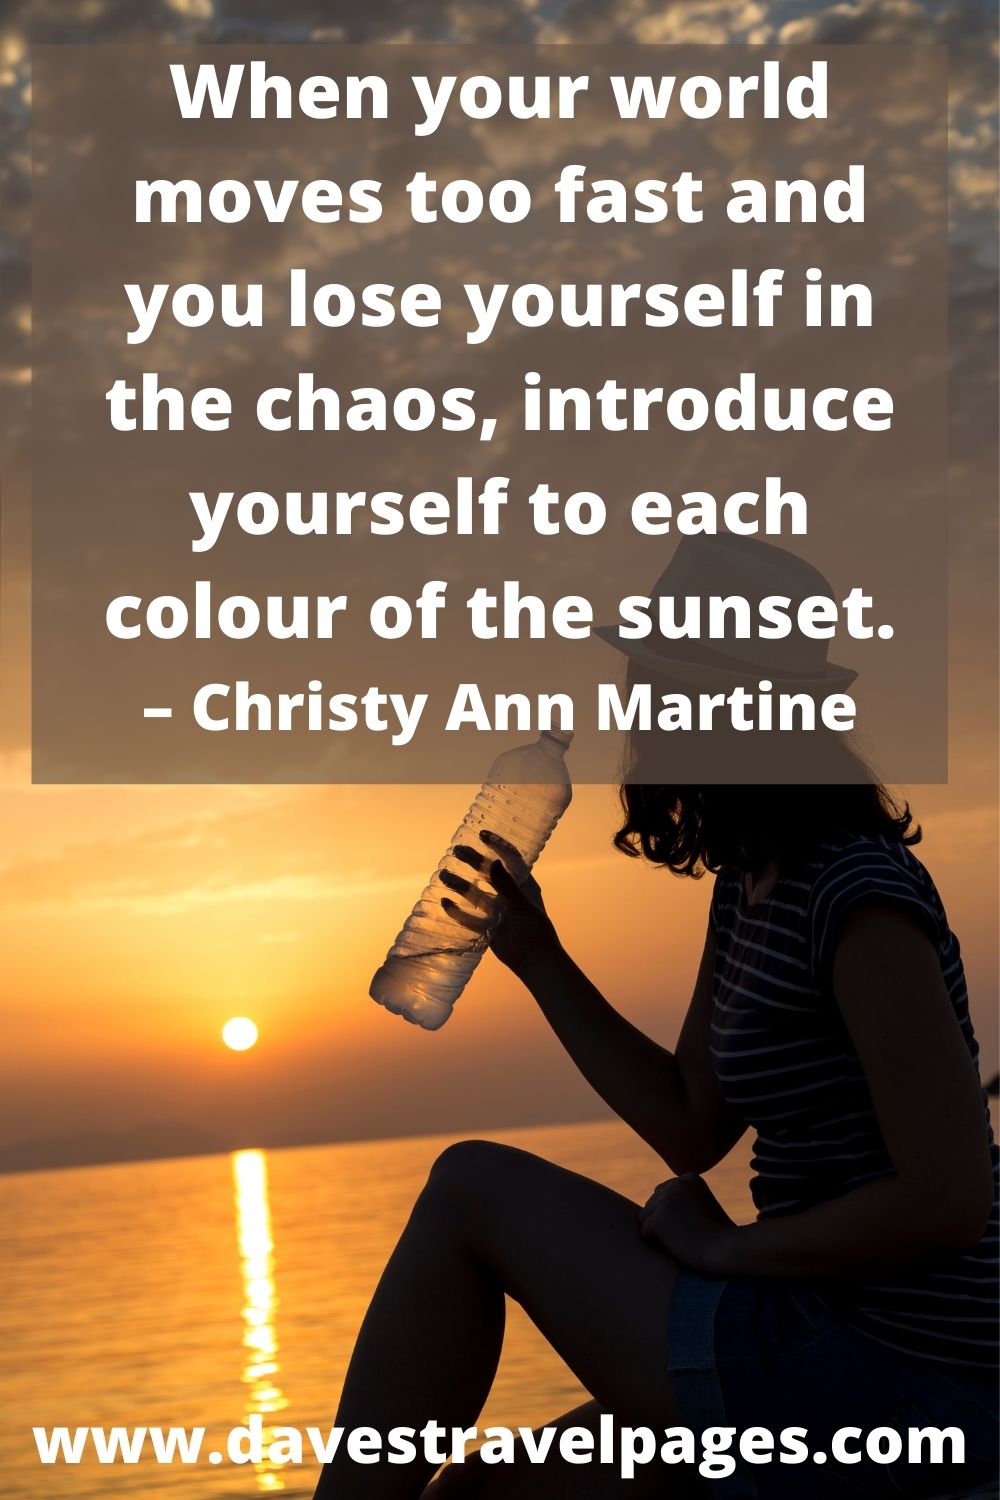 When your world moves too fast and you lose yourself in the chaos, introduce yourself to each colour of the sunset. – Christy Ann Martine